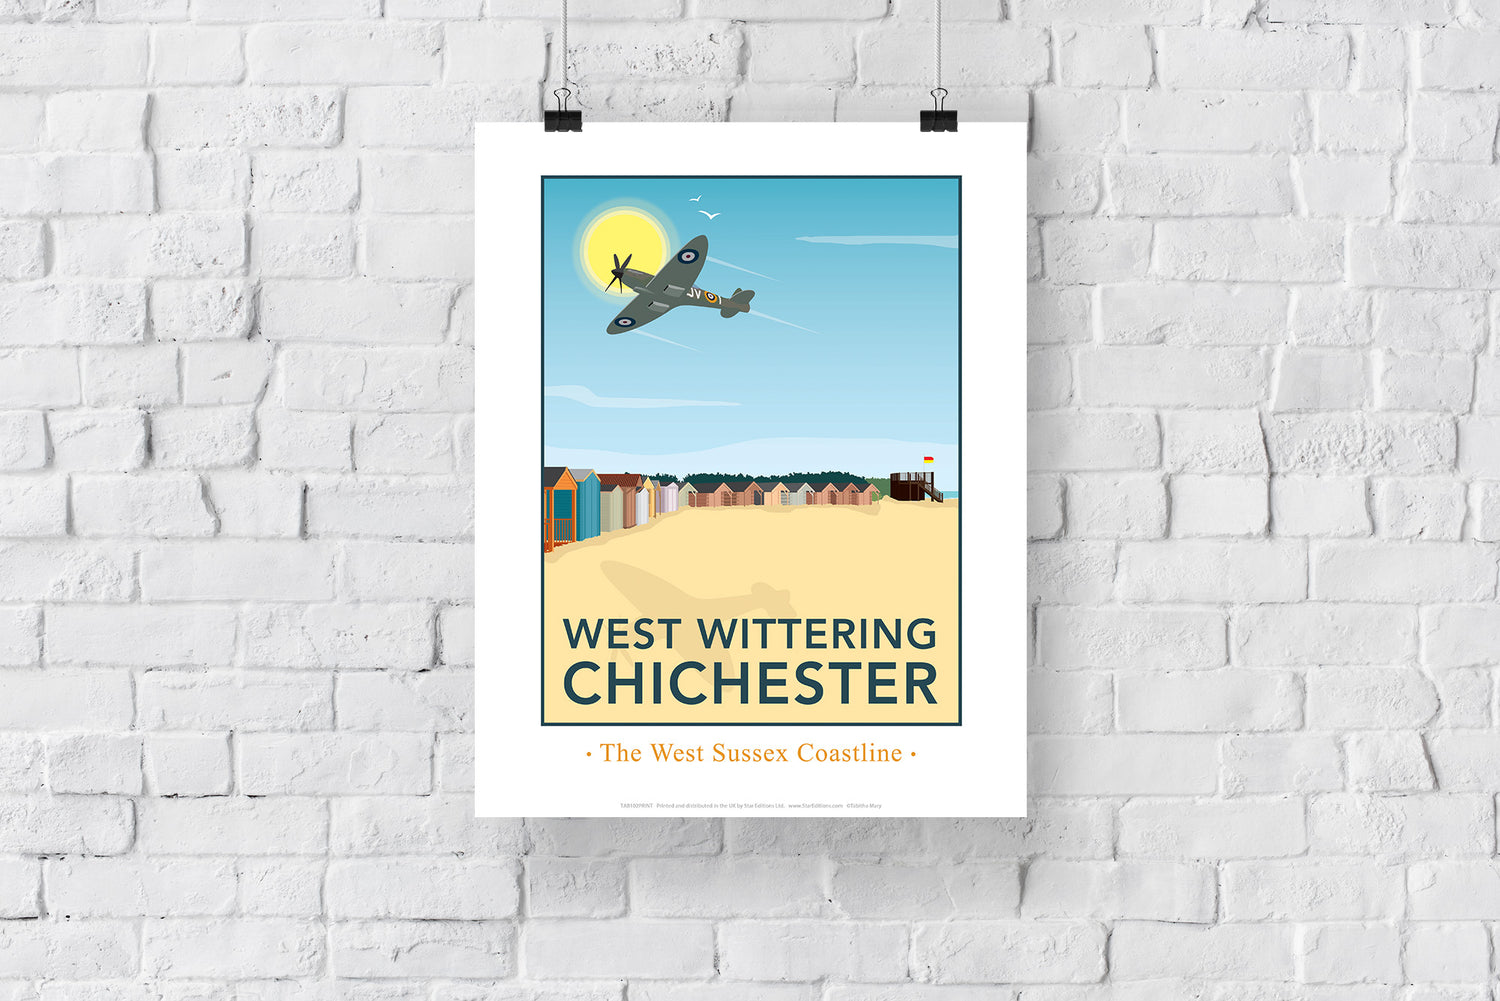 West Wittering, Chichester - Art Print